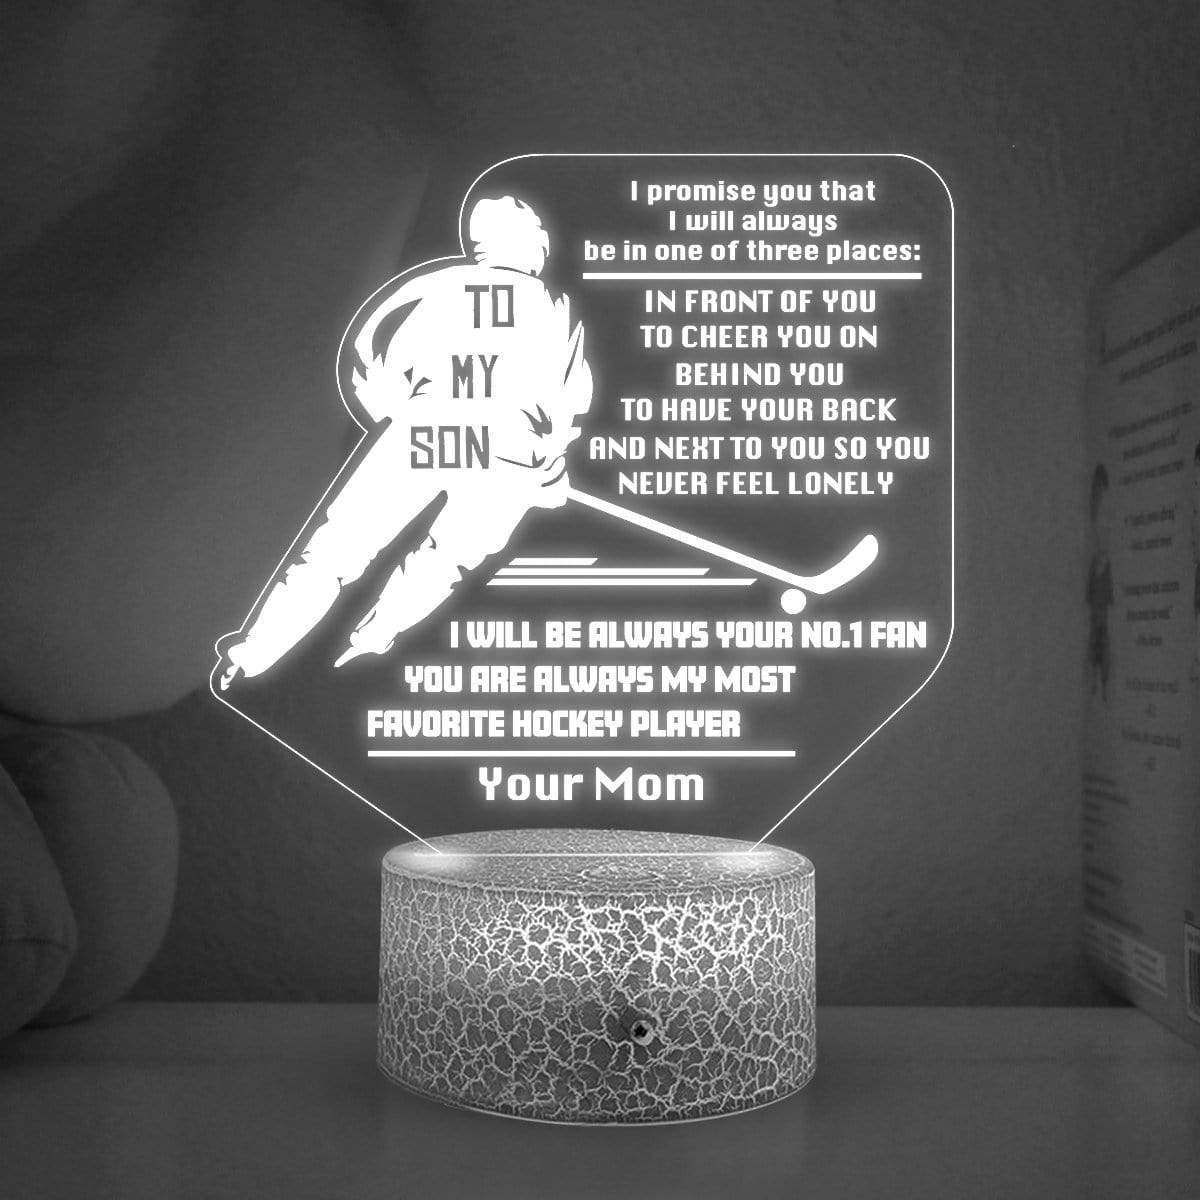 3D Led Light - Hockey - To My Son - From Mom - I Will Be Always Your No.1 Fan - Glca16001